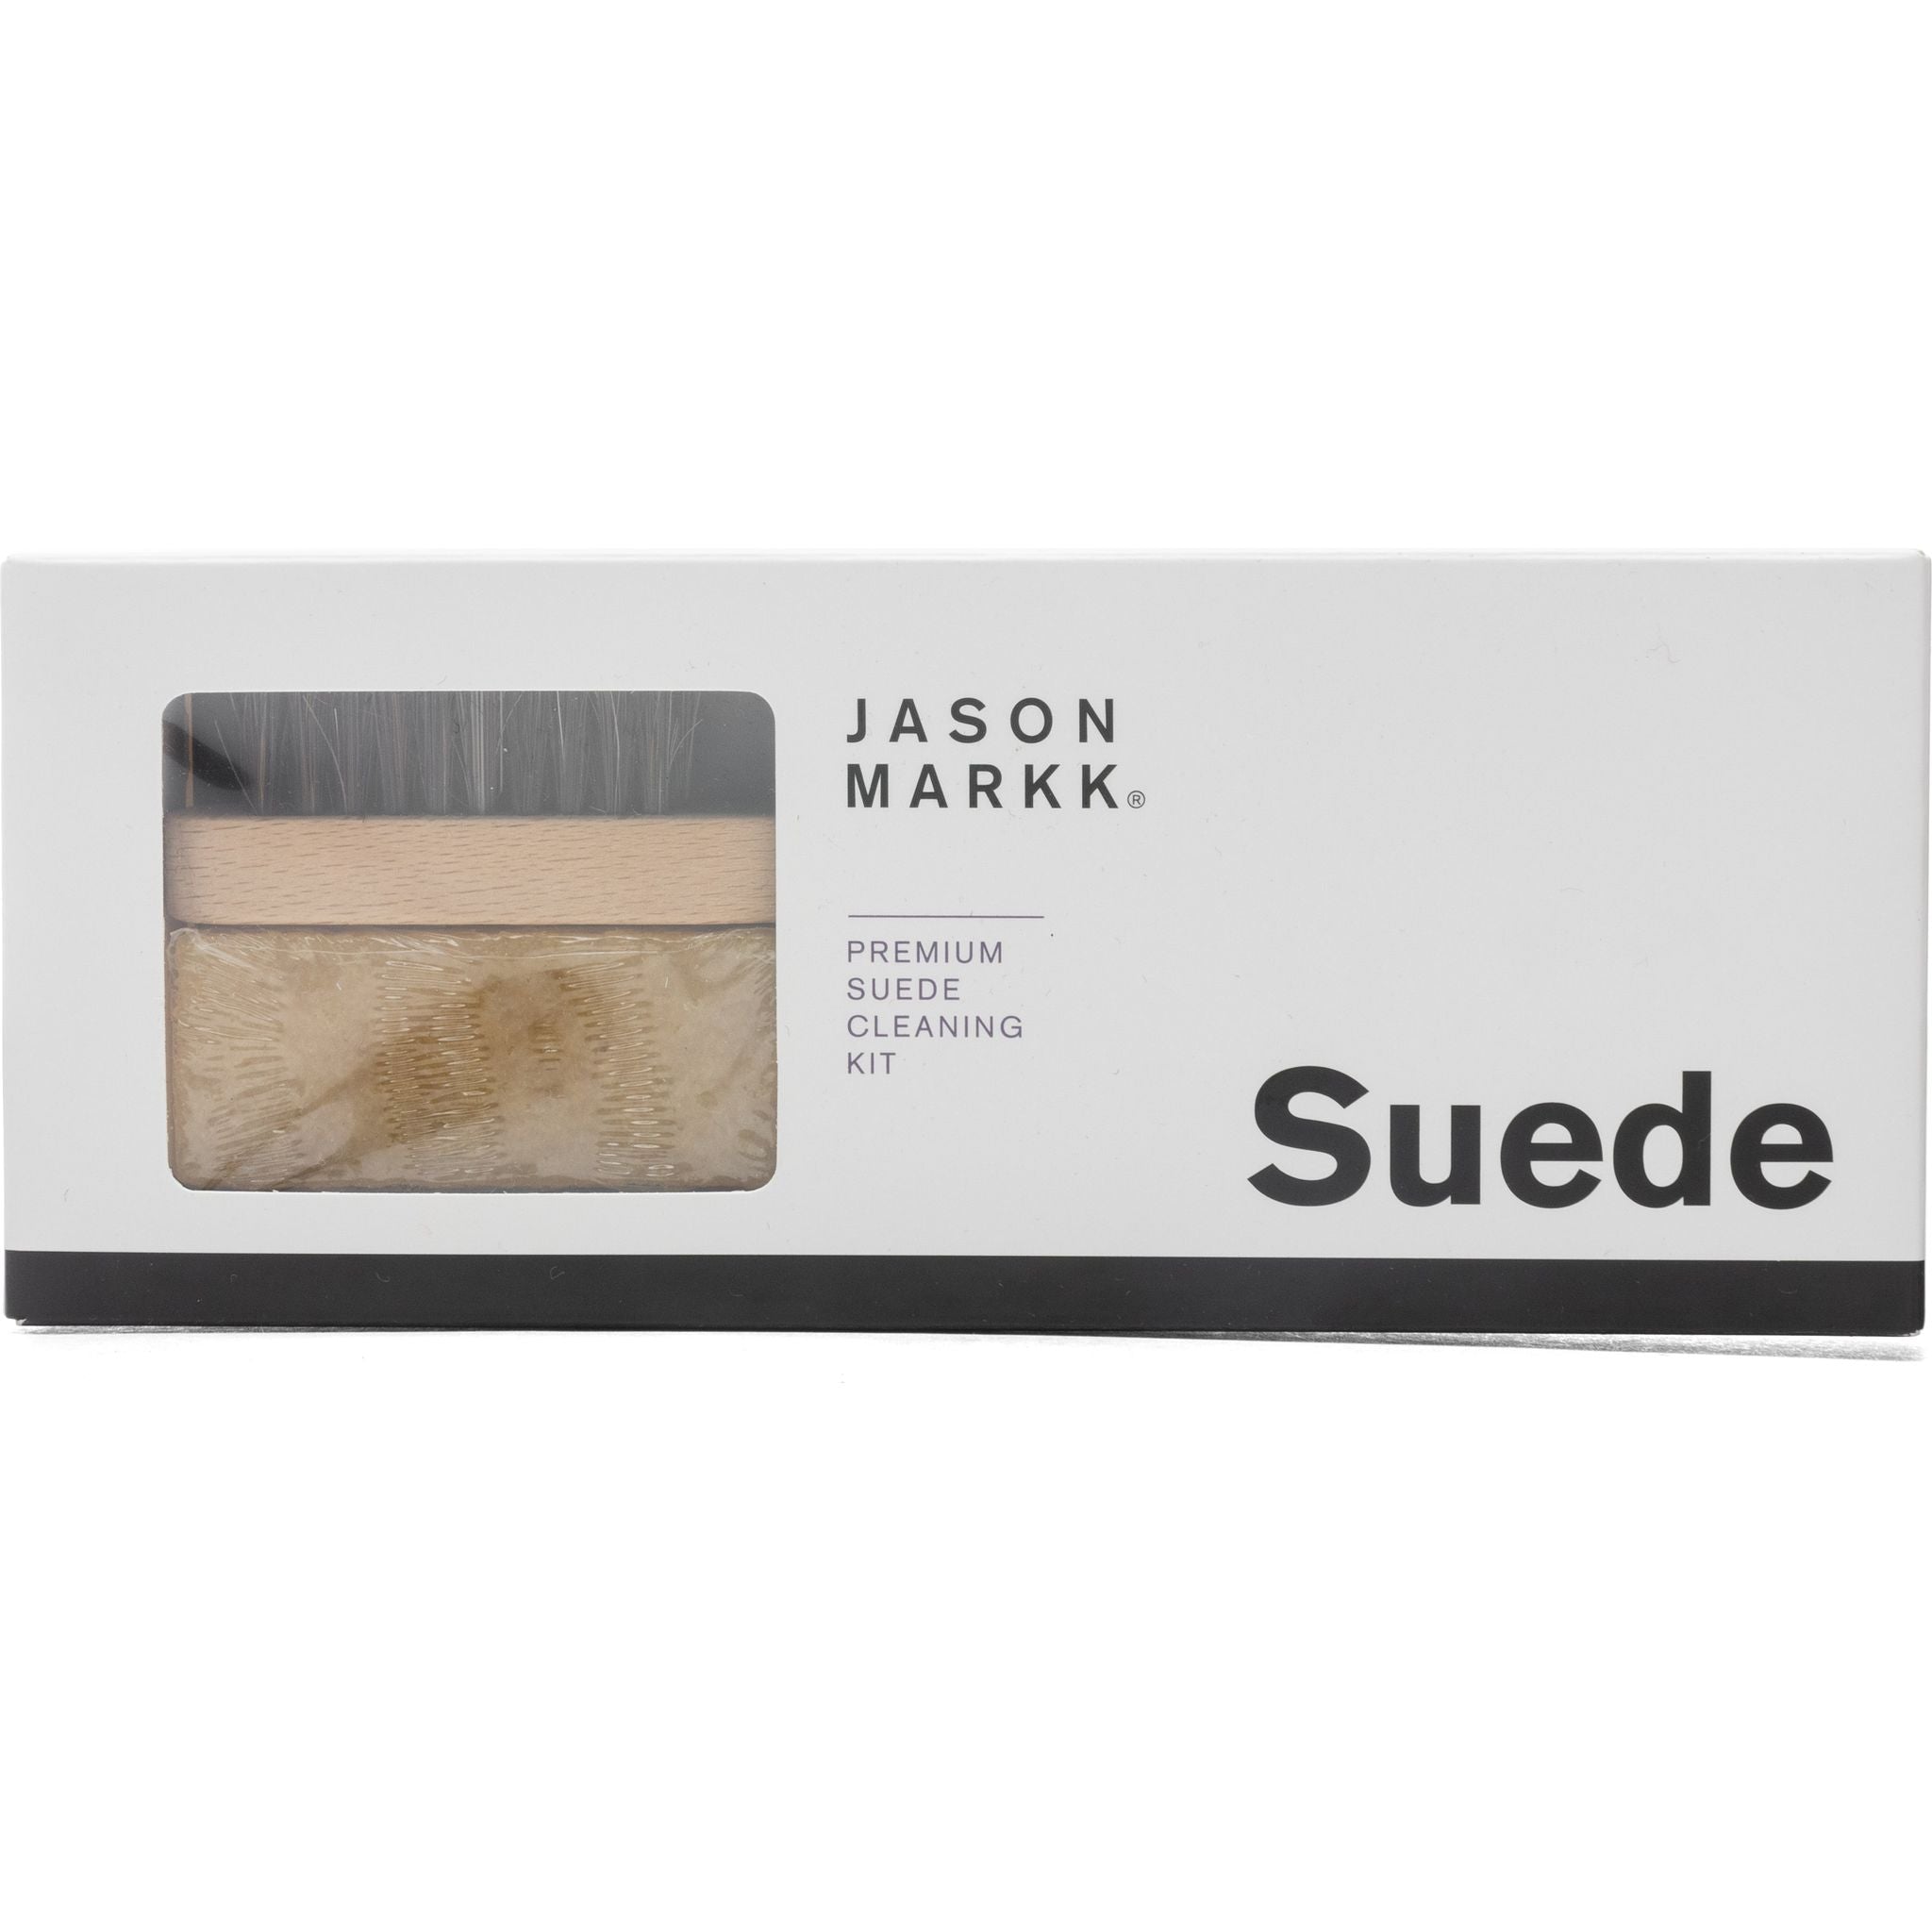 Suede Kit